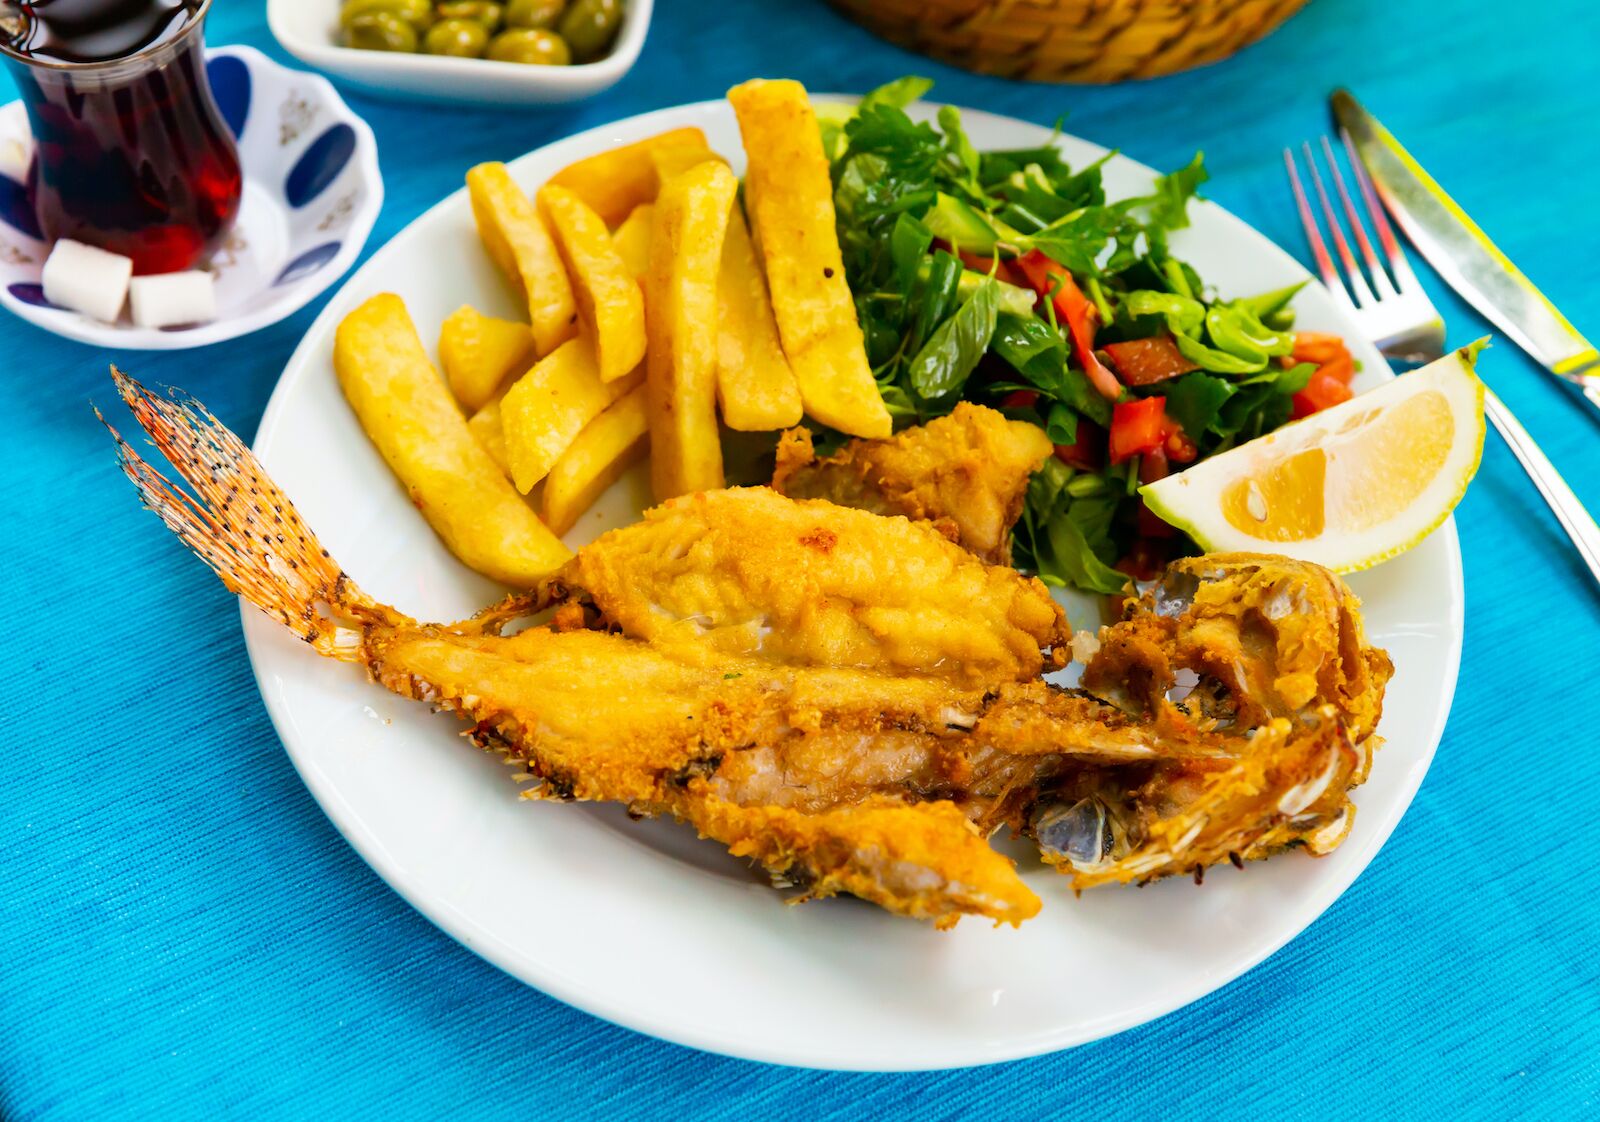 fried lionfish on plate with fries and salad lionfish hunting